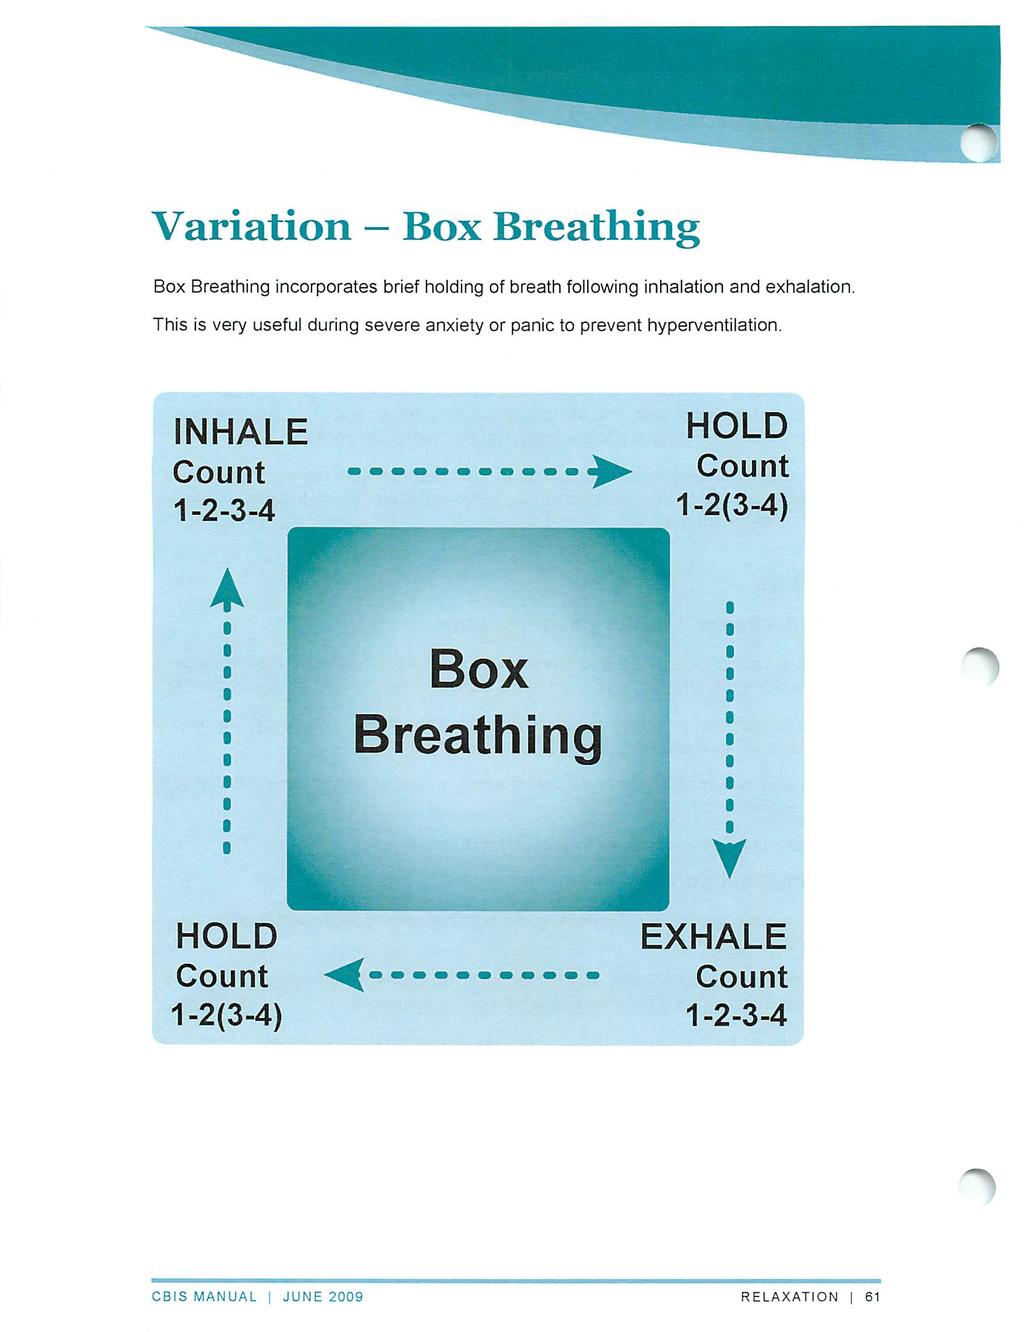 Variation - Box Breathing Box Breathing incorporates brief holding of breath following inhalation and exhalation.